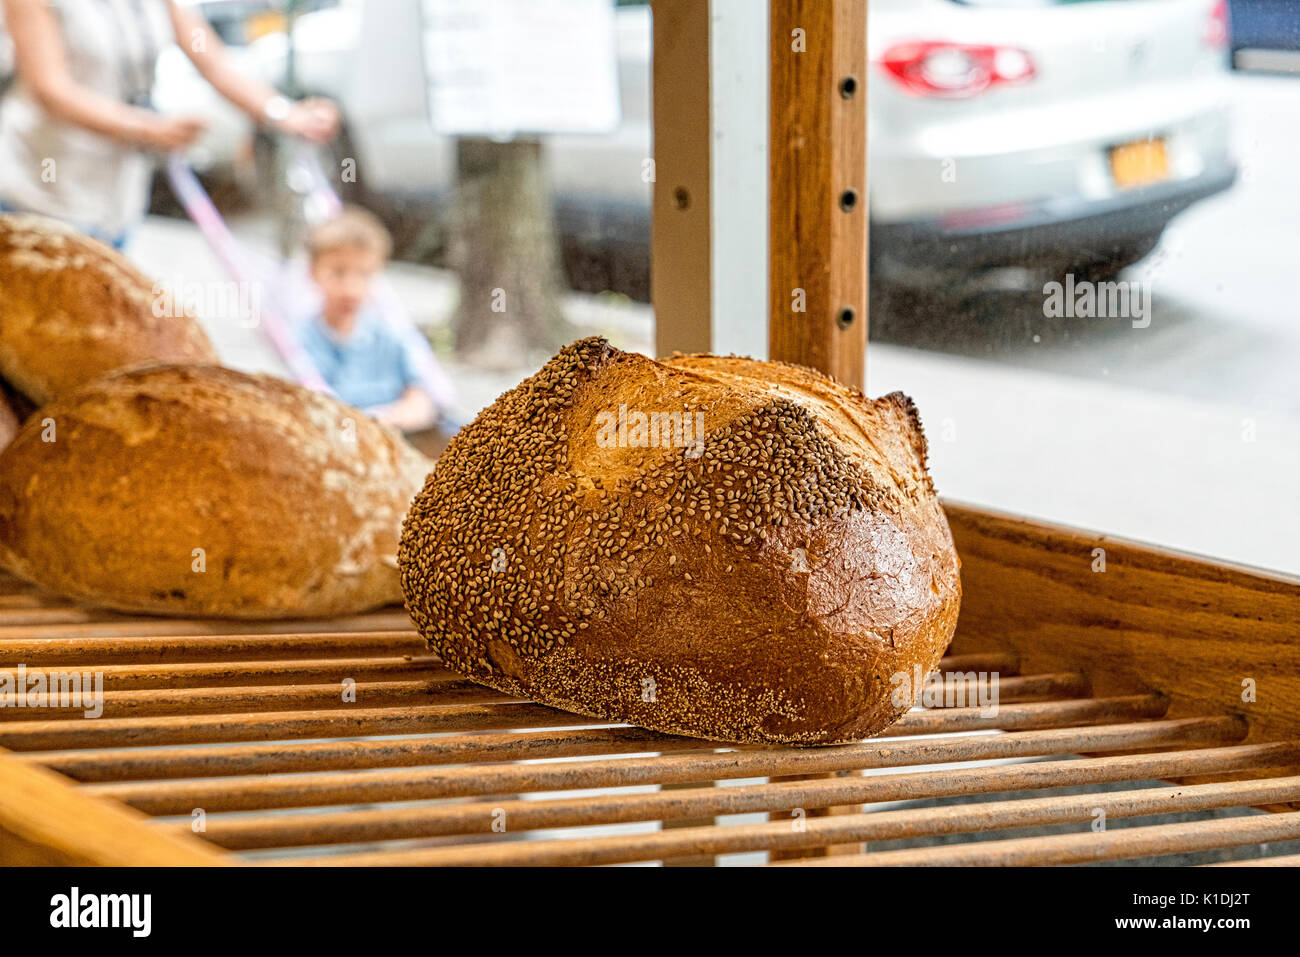 Bronx, NY, USA.  Loaf of Freshly Baked Seeded Semolina Bread, Displayed in a bakersy window on a wooden shelf.  Street, parked cars and woman pushing  Stock Photo